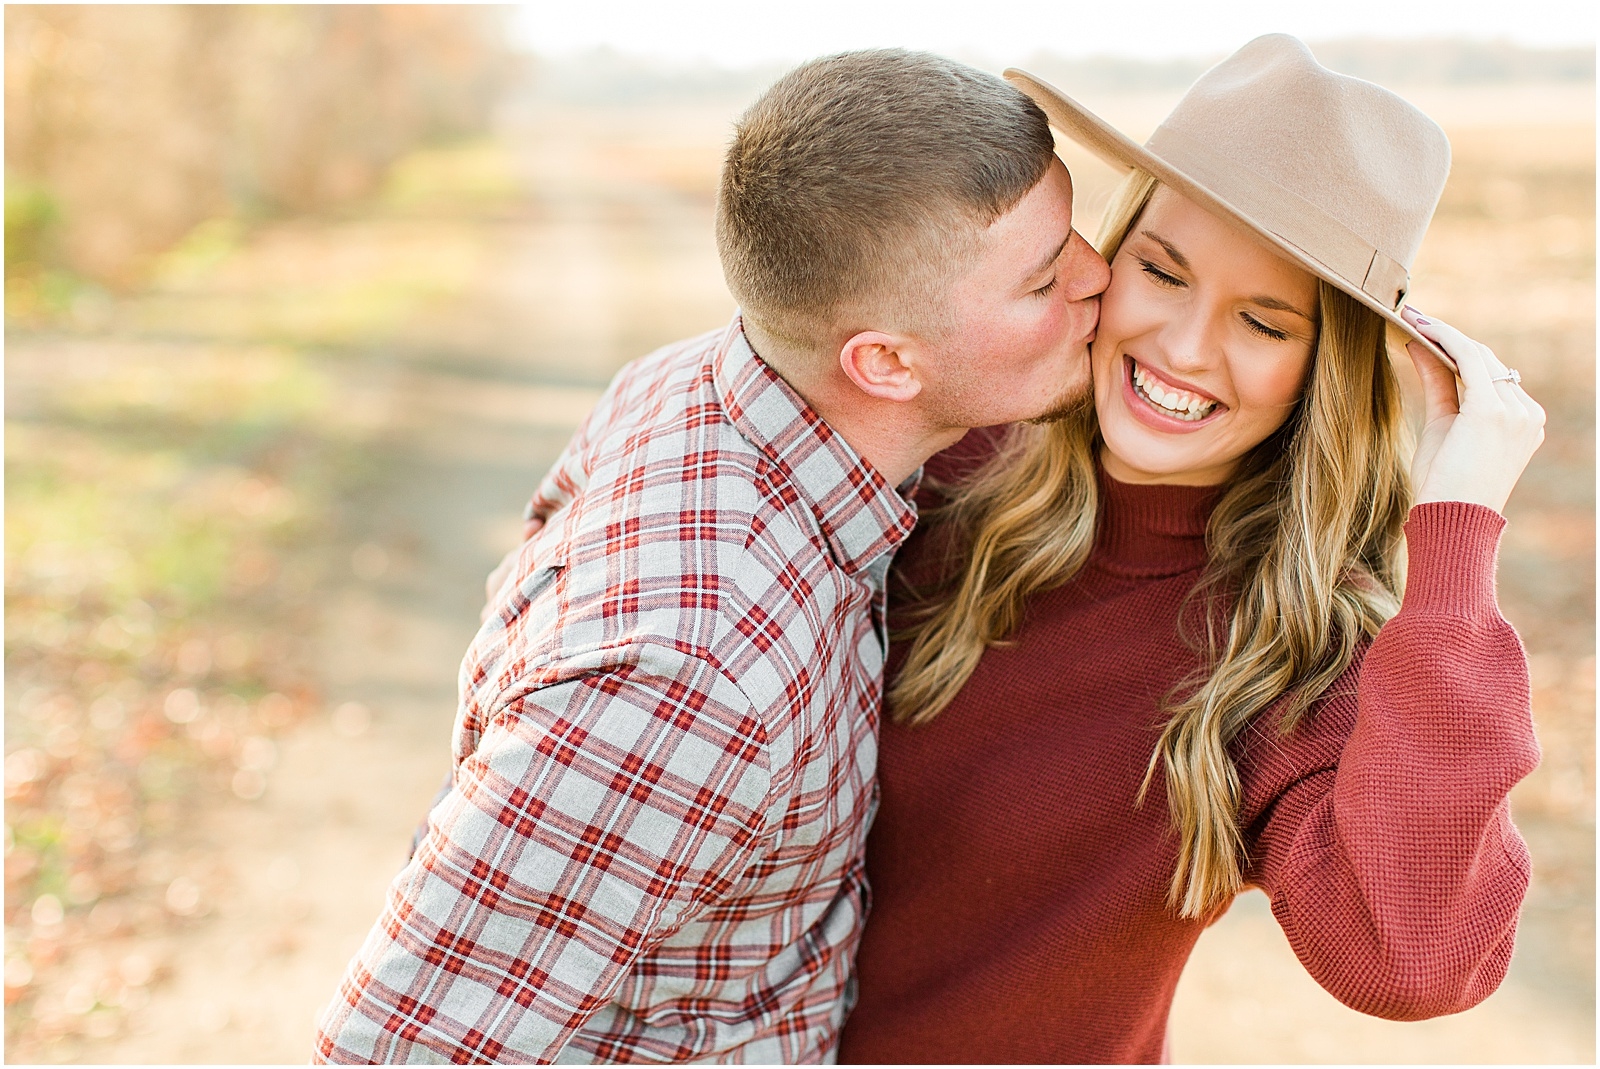 A Fall Southern Indiana Engagement Seesion | Cody and Hannah | Bret and Brandie Photography 009.jpg